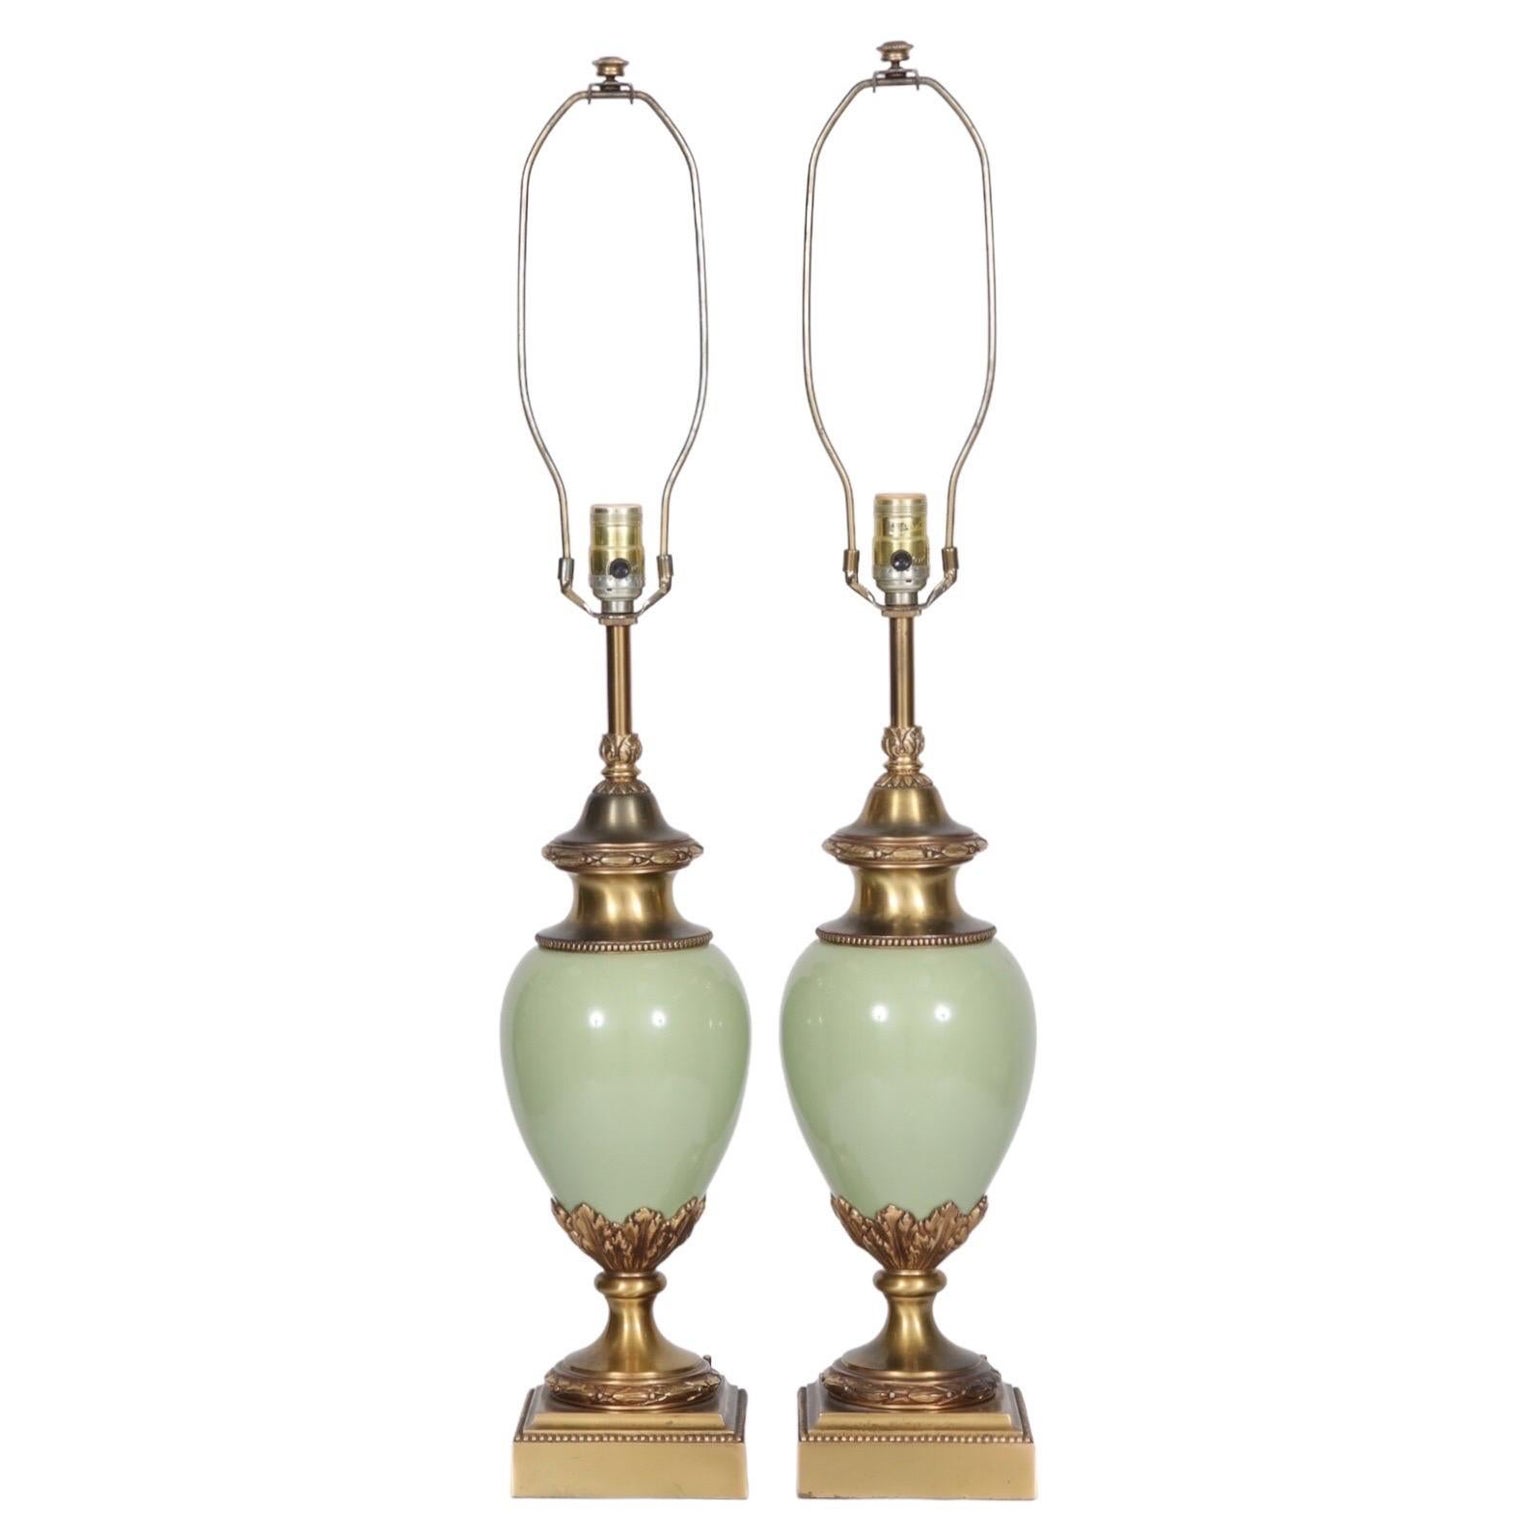 Brass and Porcelain Table Lamps by Stiffel, a Pair For Sale